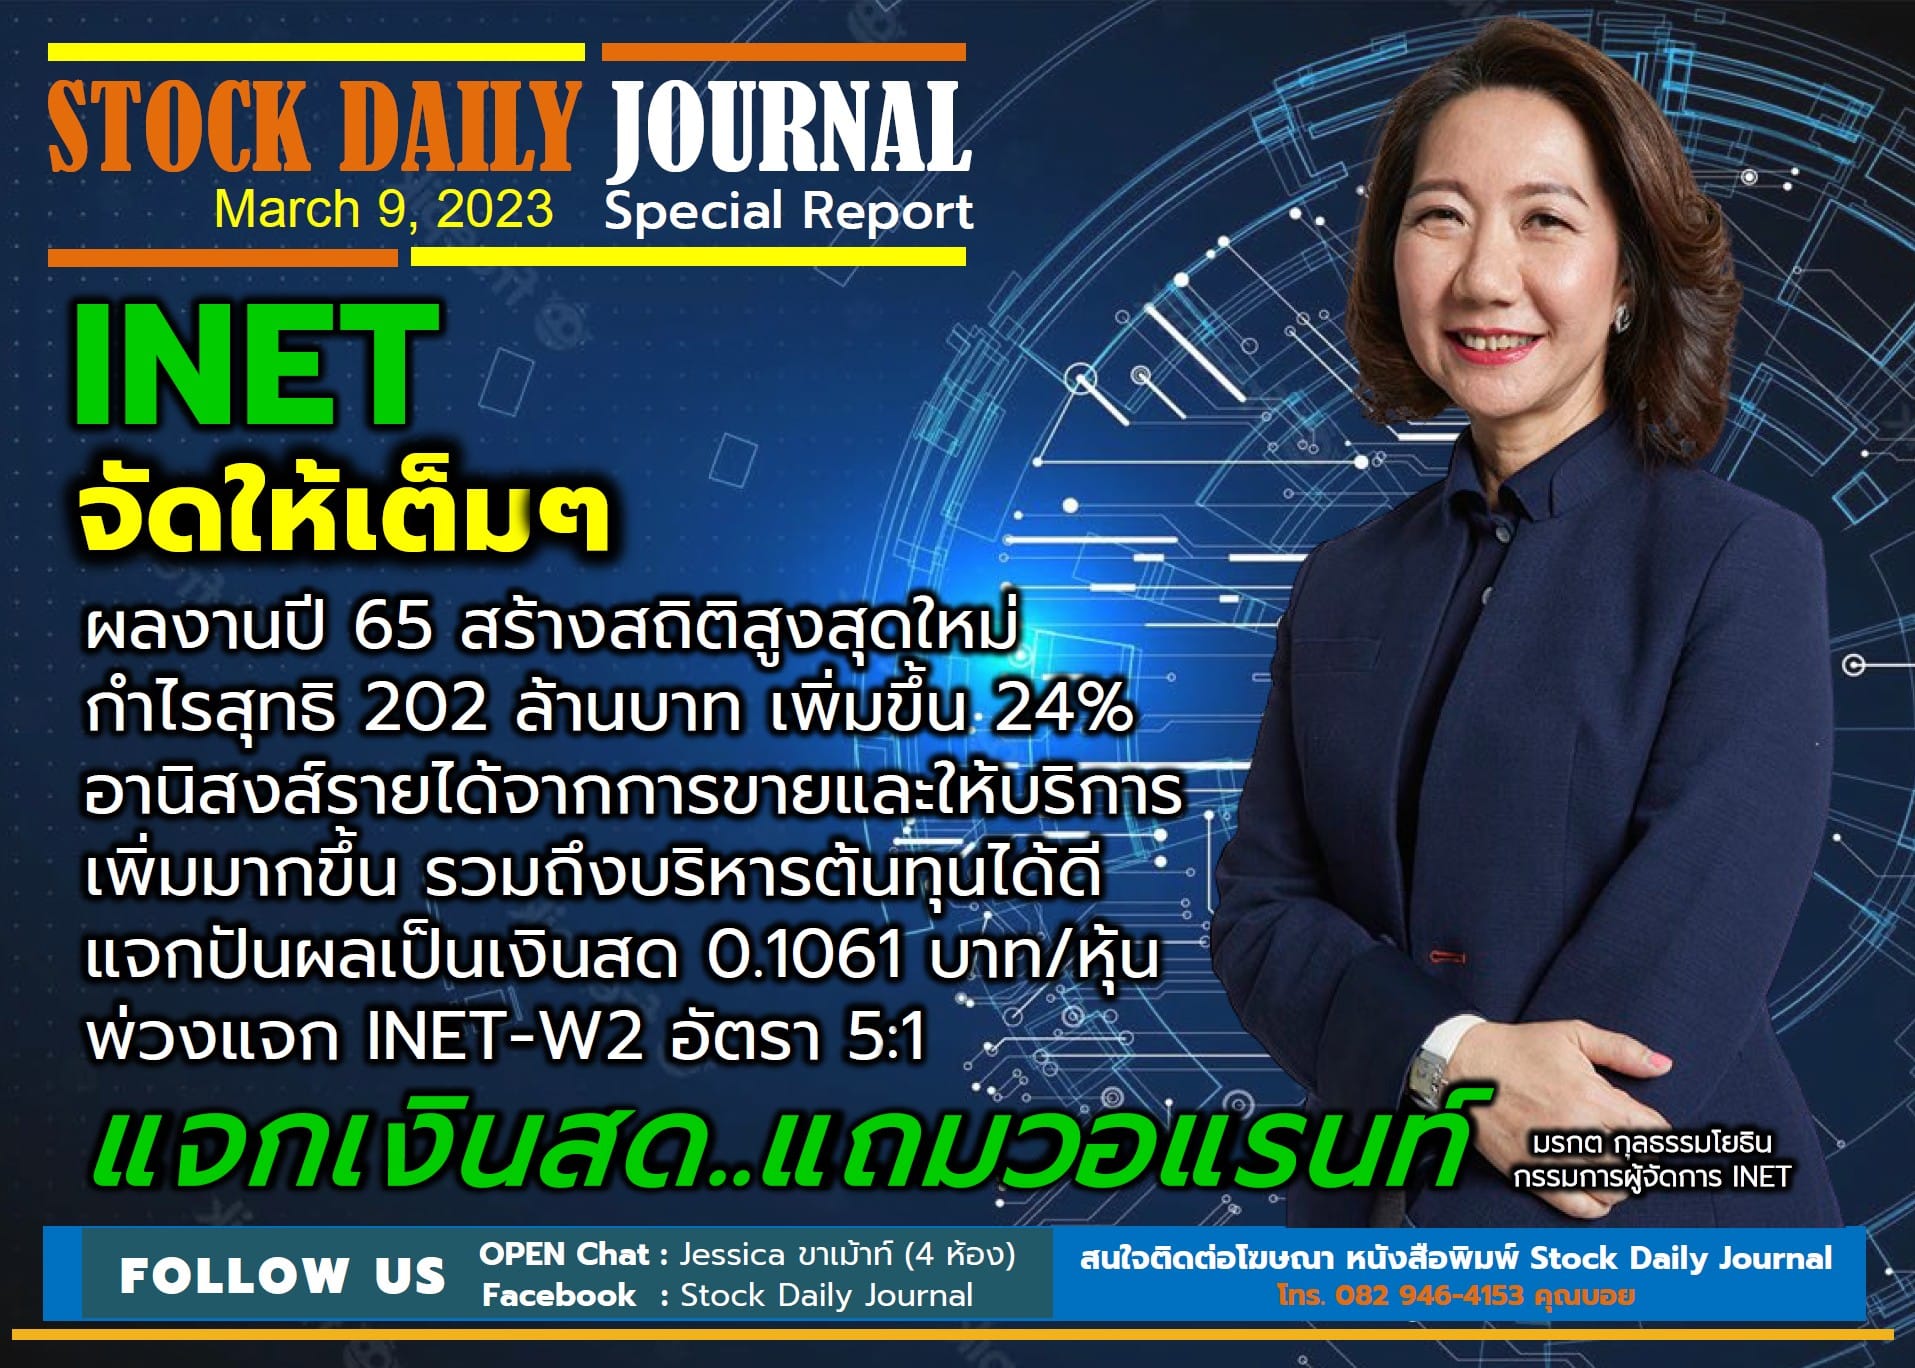 STOCK DAILY JOURNAL “Special Report : INET”